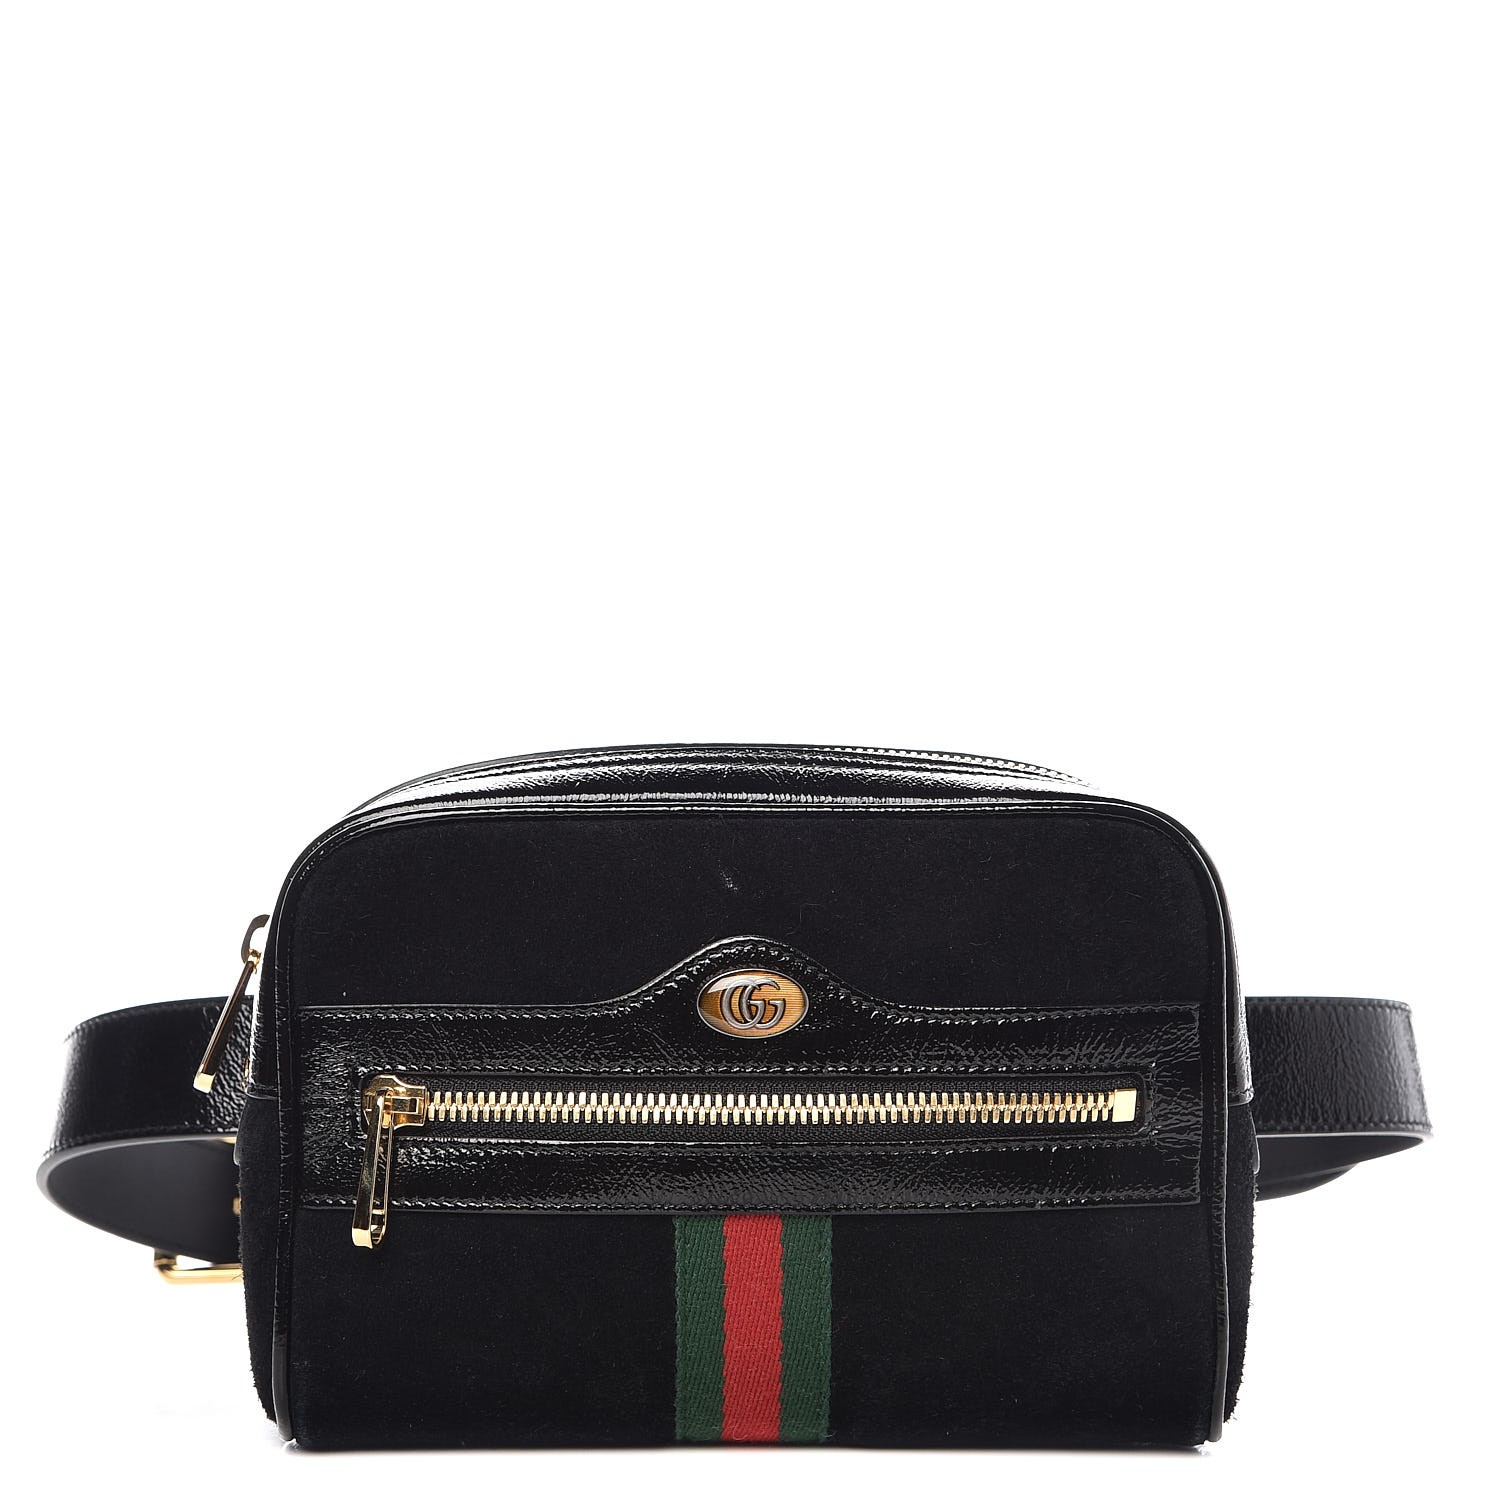 GUCCI Suede Small Ophidia Belt Bag 85 34 Black 295431